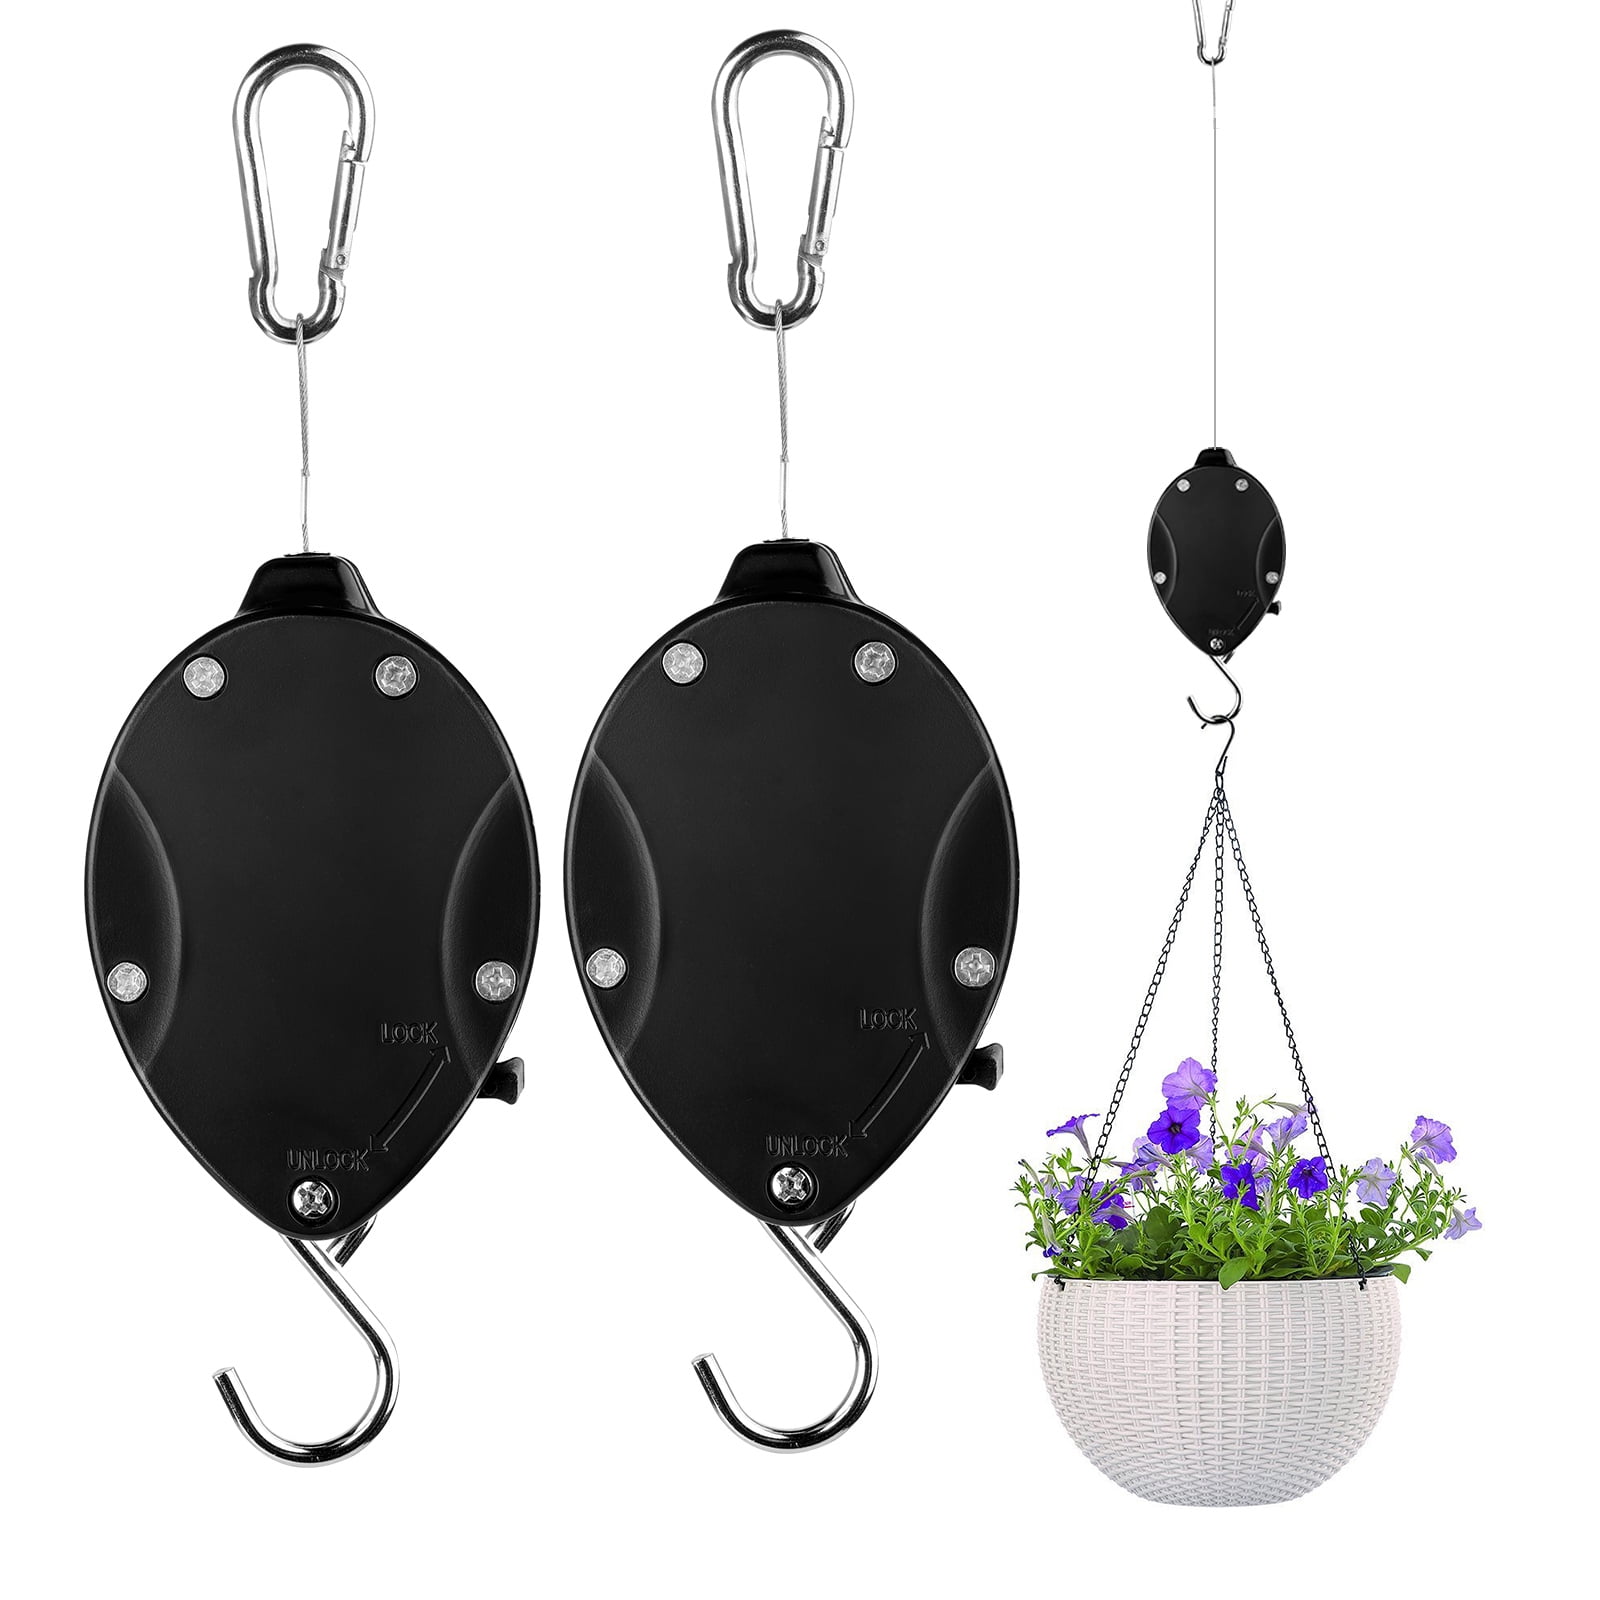 2 Pack Plant Hook Pulley Retractable Plant Hanger with Manual Fixing Lock Easy Reach & Stainless Steel Rope for Hanging Plant and Bird Feed 